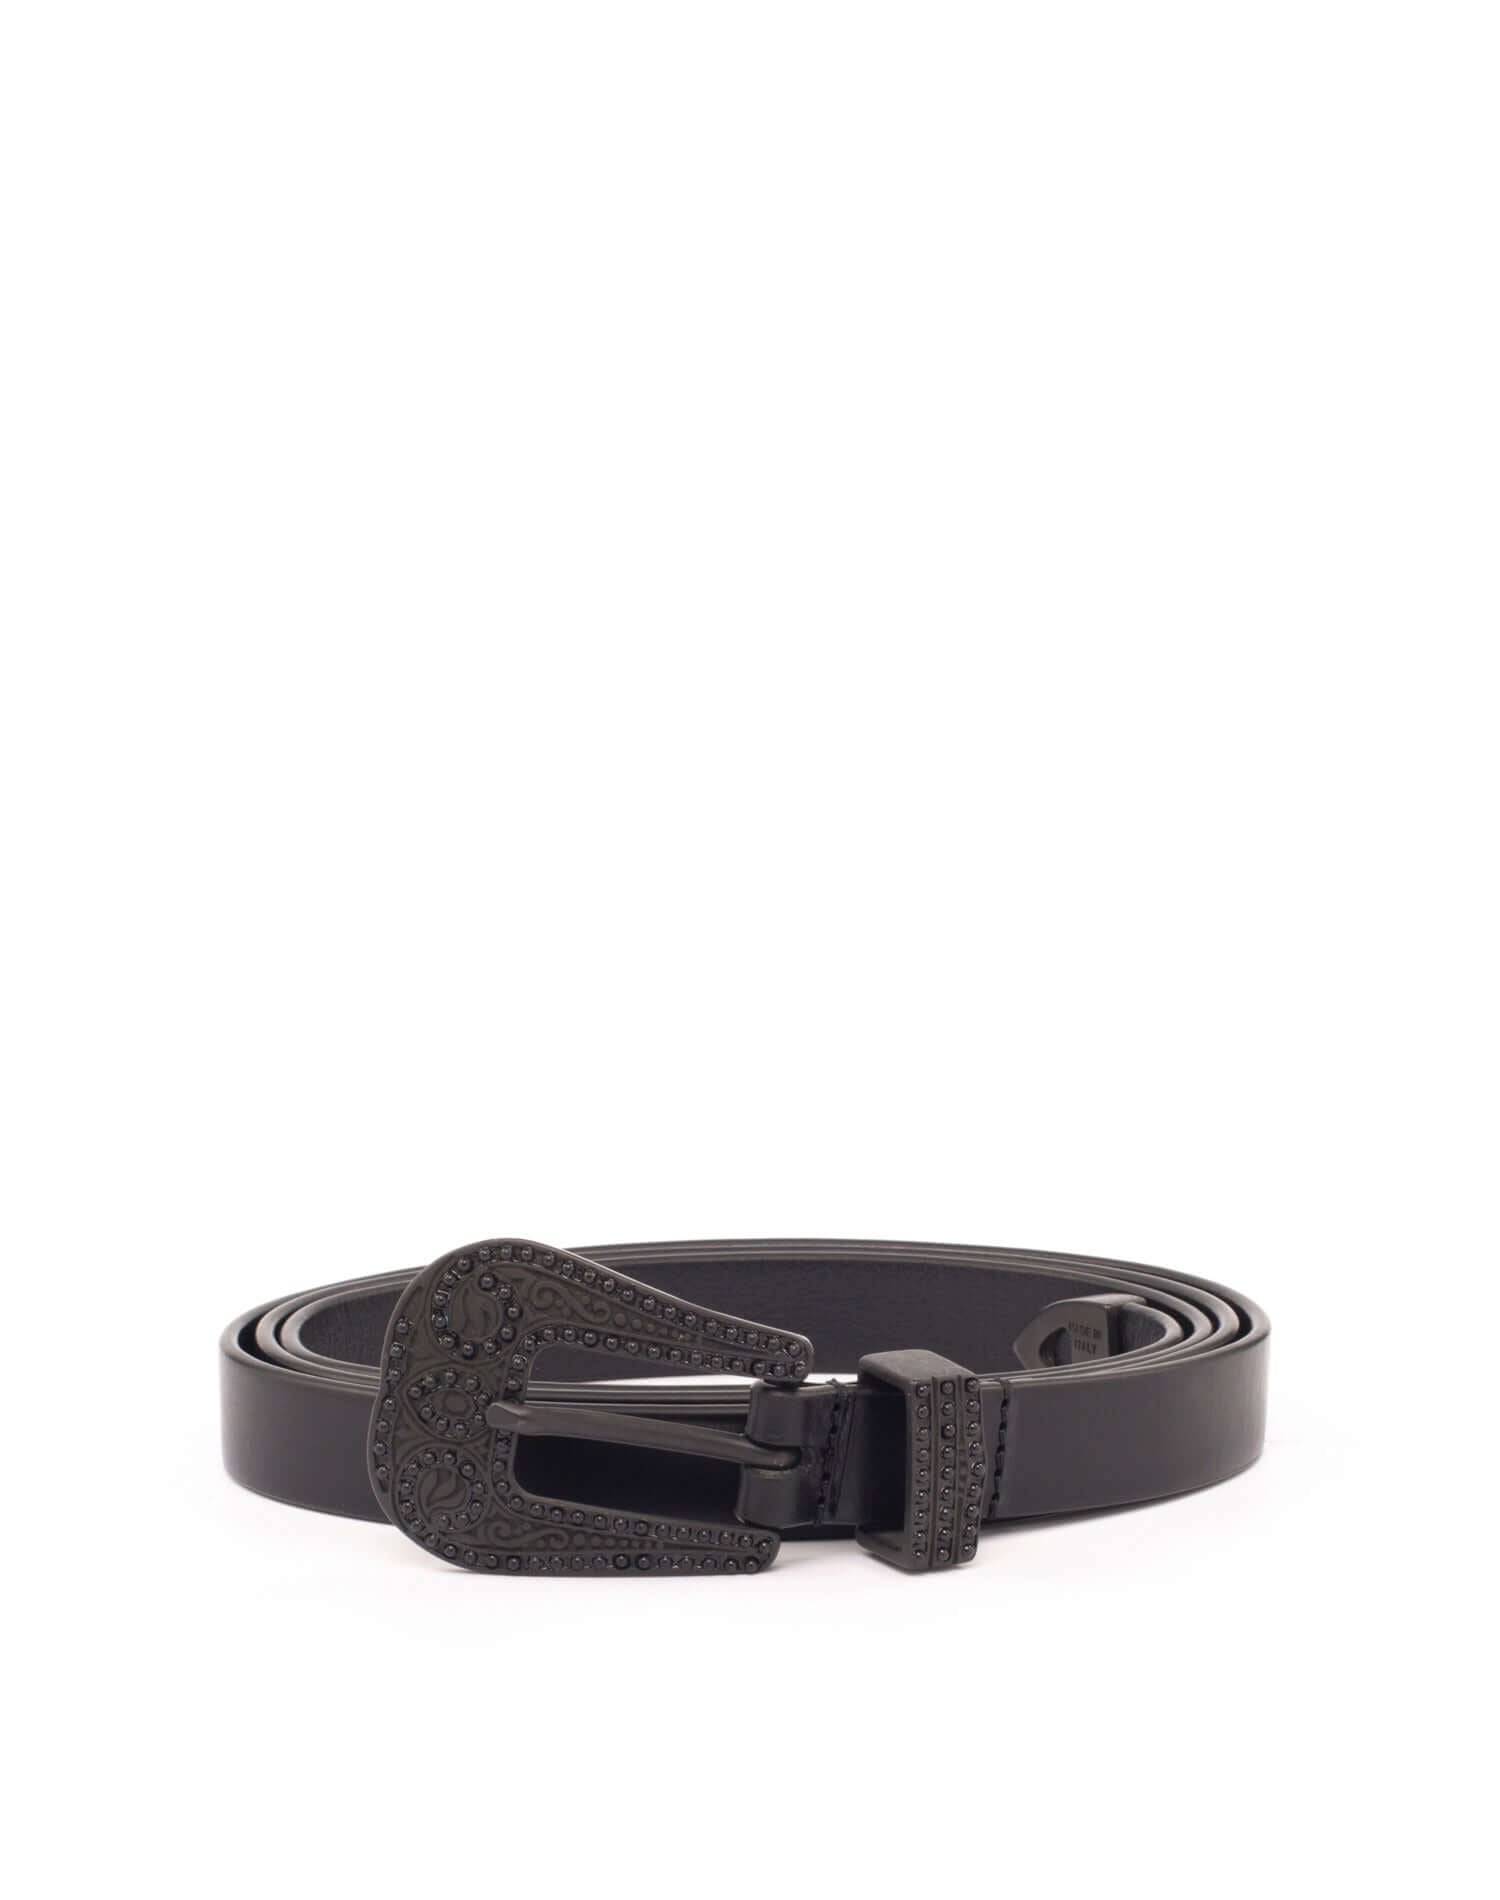 KARLIE BELT Leather belt. Brass buckle, loop and point with glass stones. 2 cm height. Made in Italy HTC LOS ANGELES